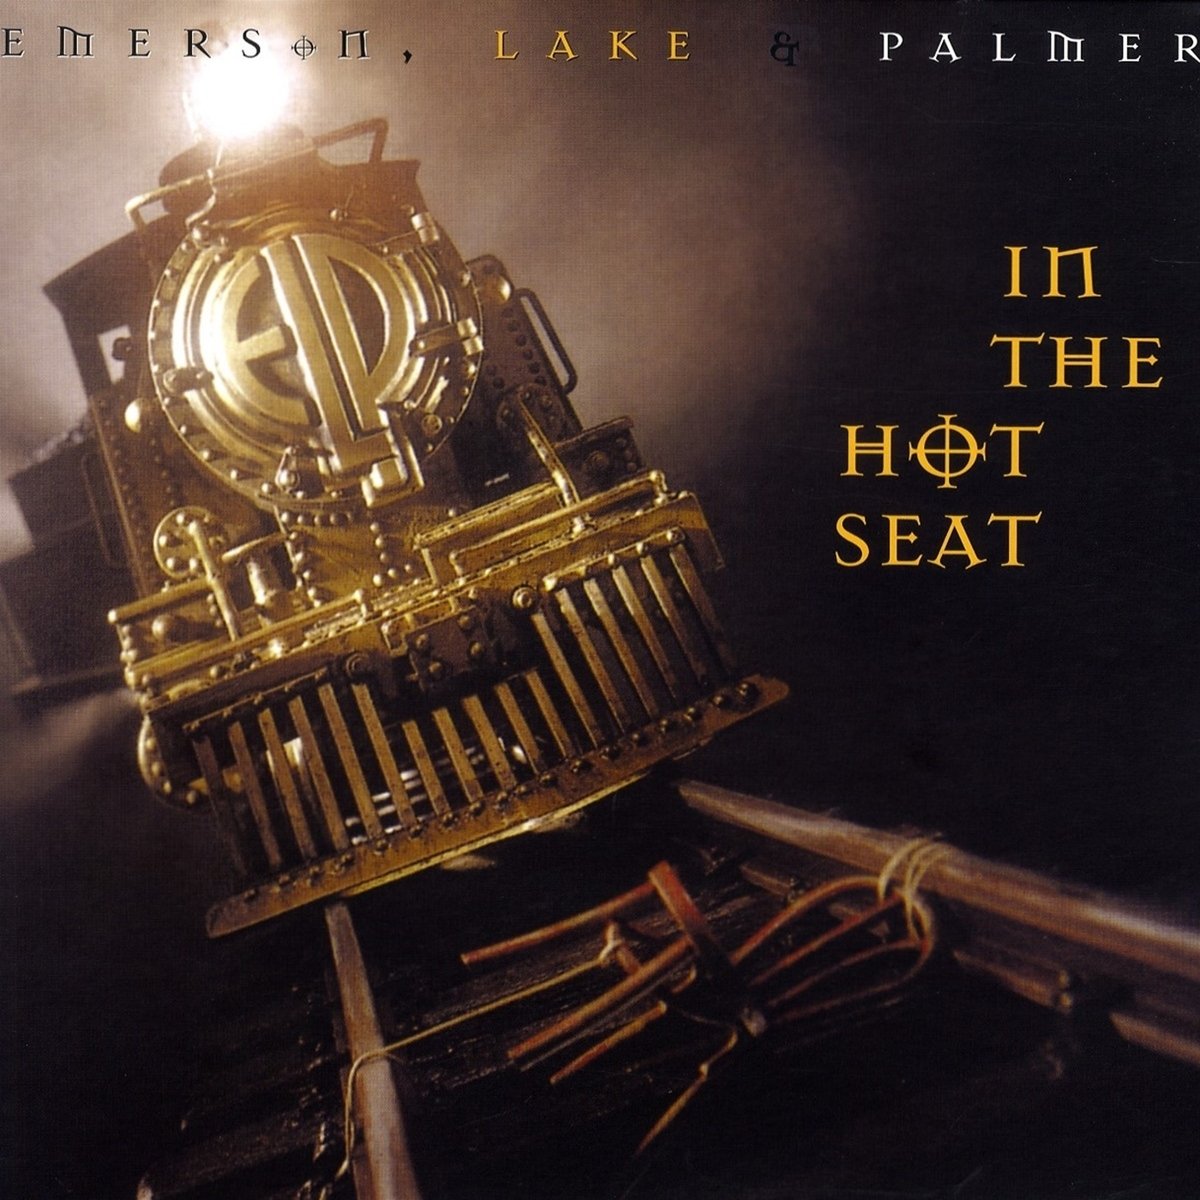 Emerson Lake and Palmer in the hot Seat